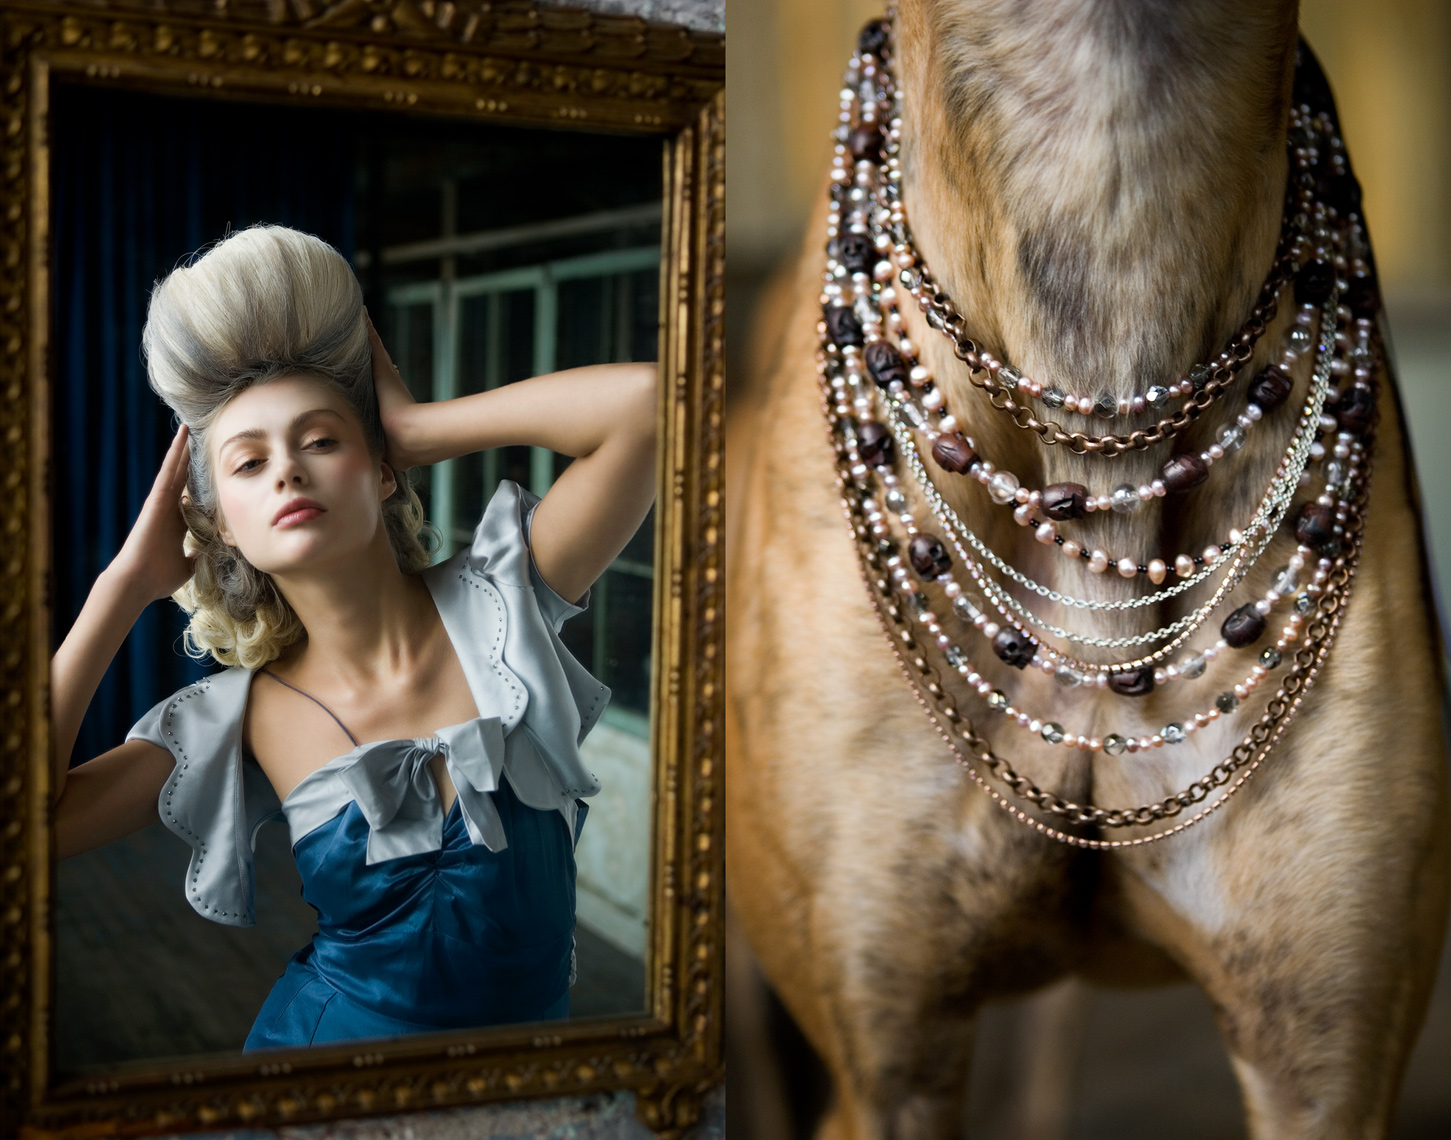 Los Angeles Dog Photography, Michael Brian, pet, cat, Marie Antoinette fashion story, Greyhound, dog necklaces, Metropolitan building, Long Island City, Footwear Plus